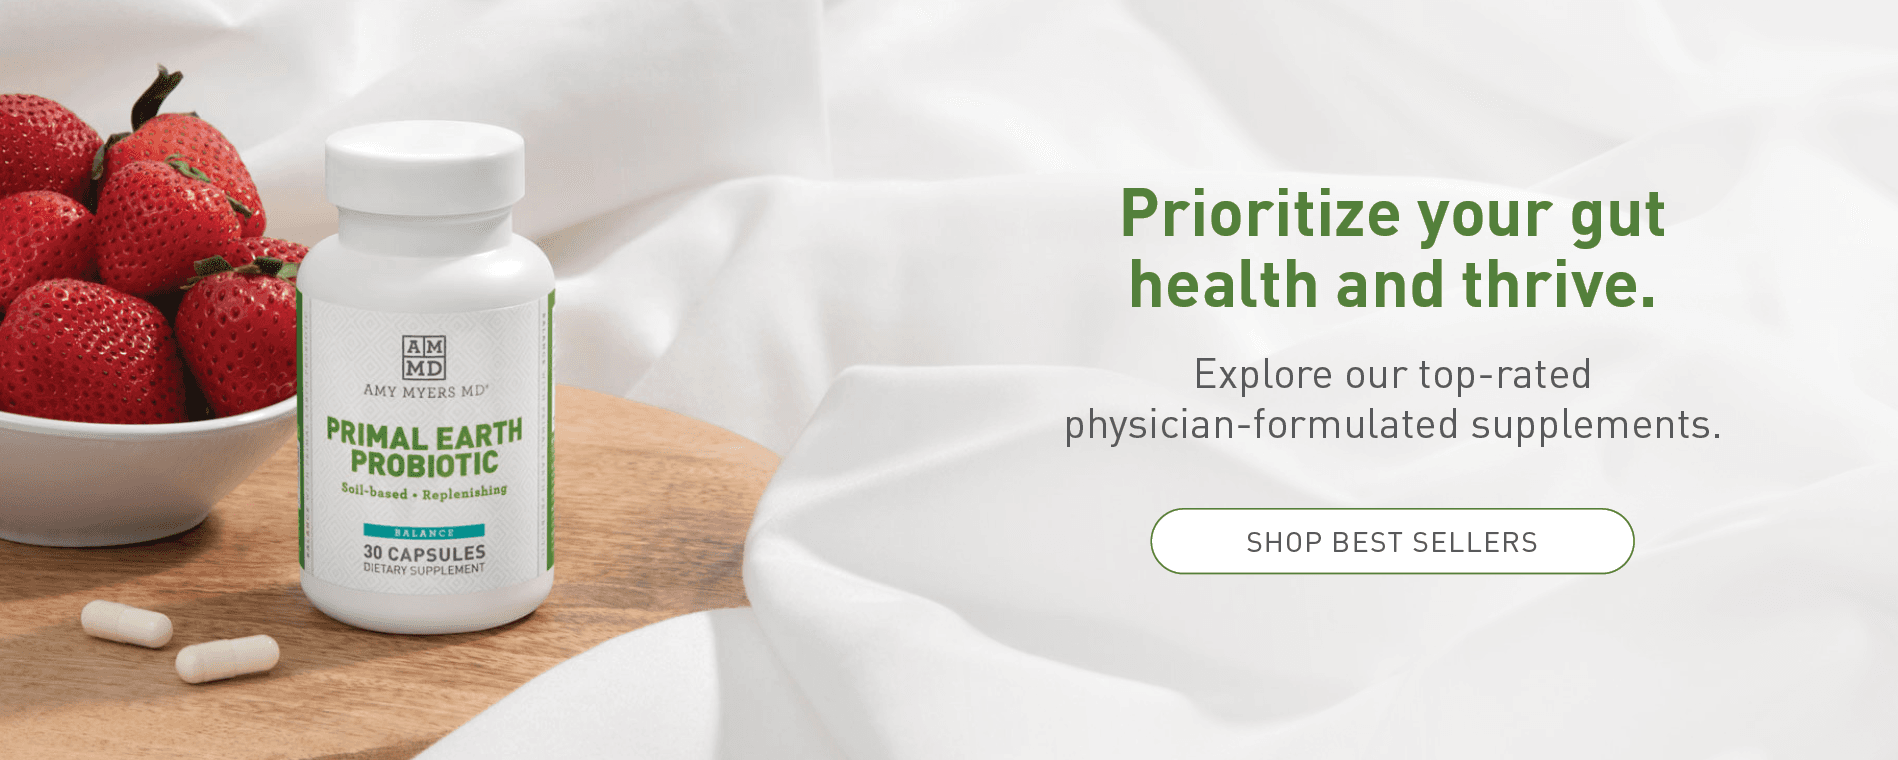 Prioritize your get health and thrive. Explore our top-rated physician-formulated supplements. Shop best sellers.